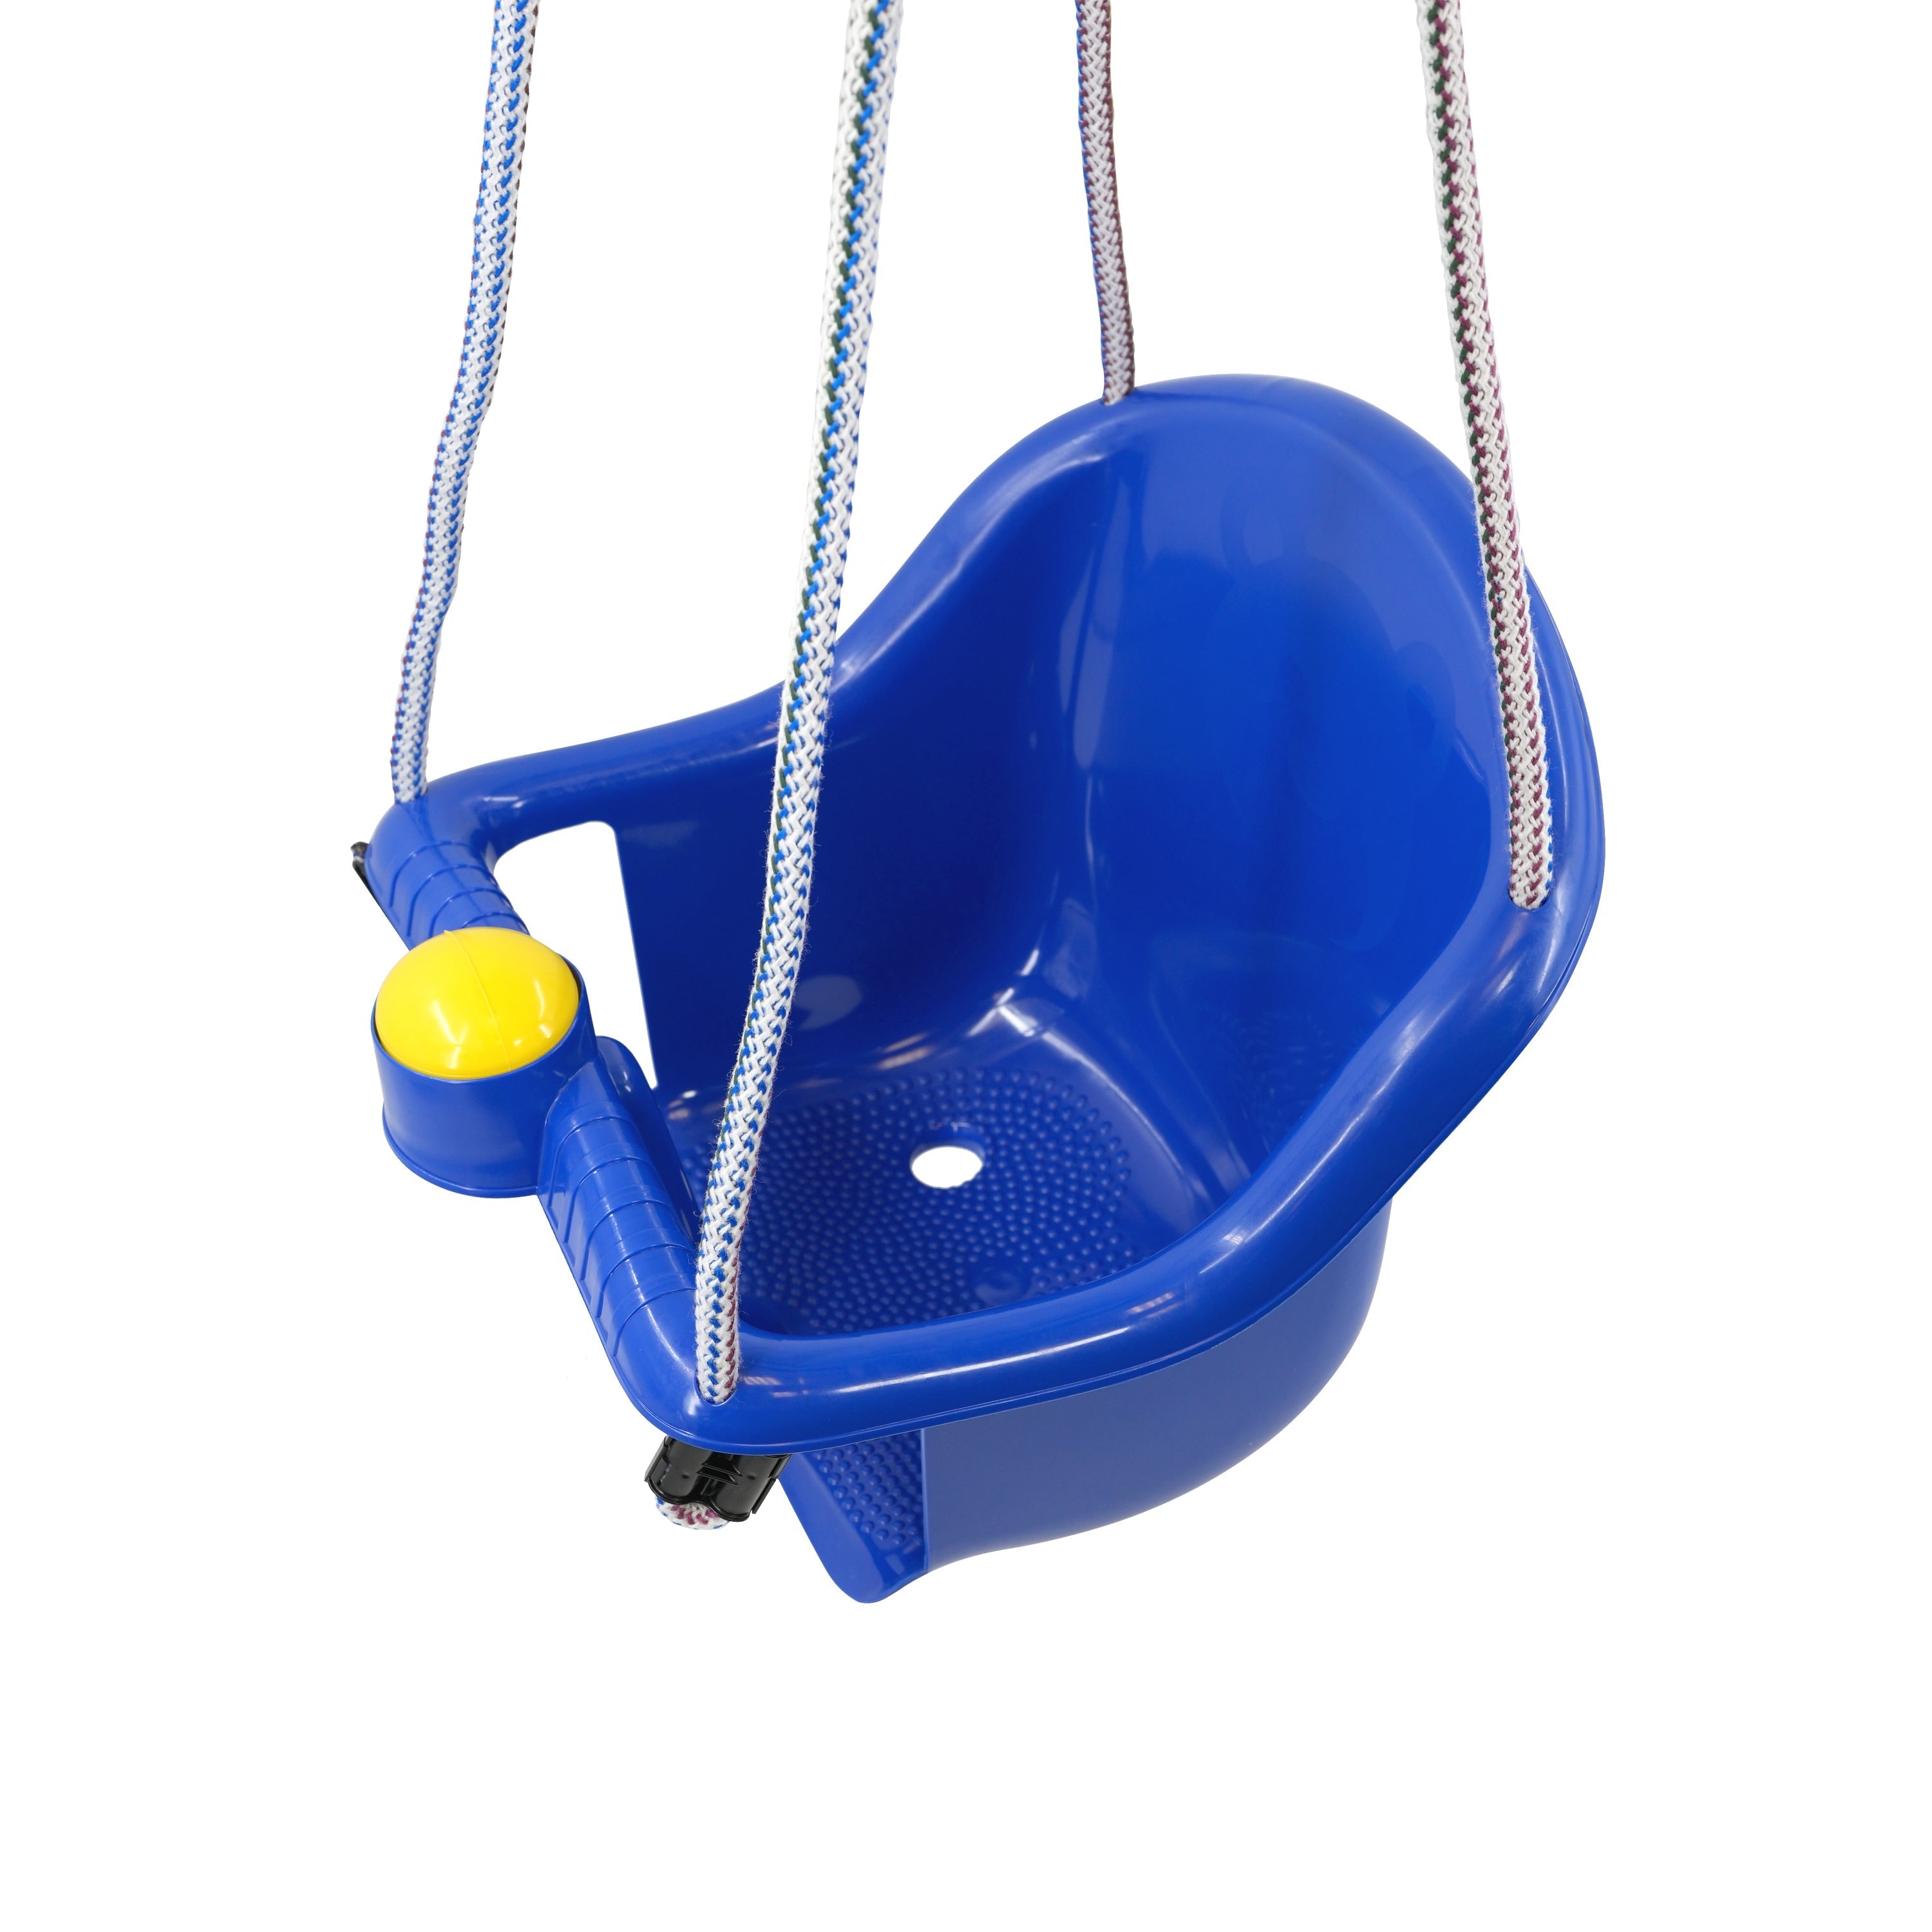 Toddler Safety Safe Swing Seat with Adjustable Garden Rope MTS - The Magic Toy Shop